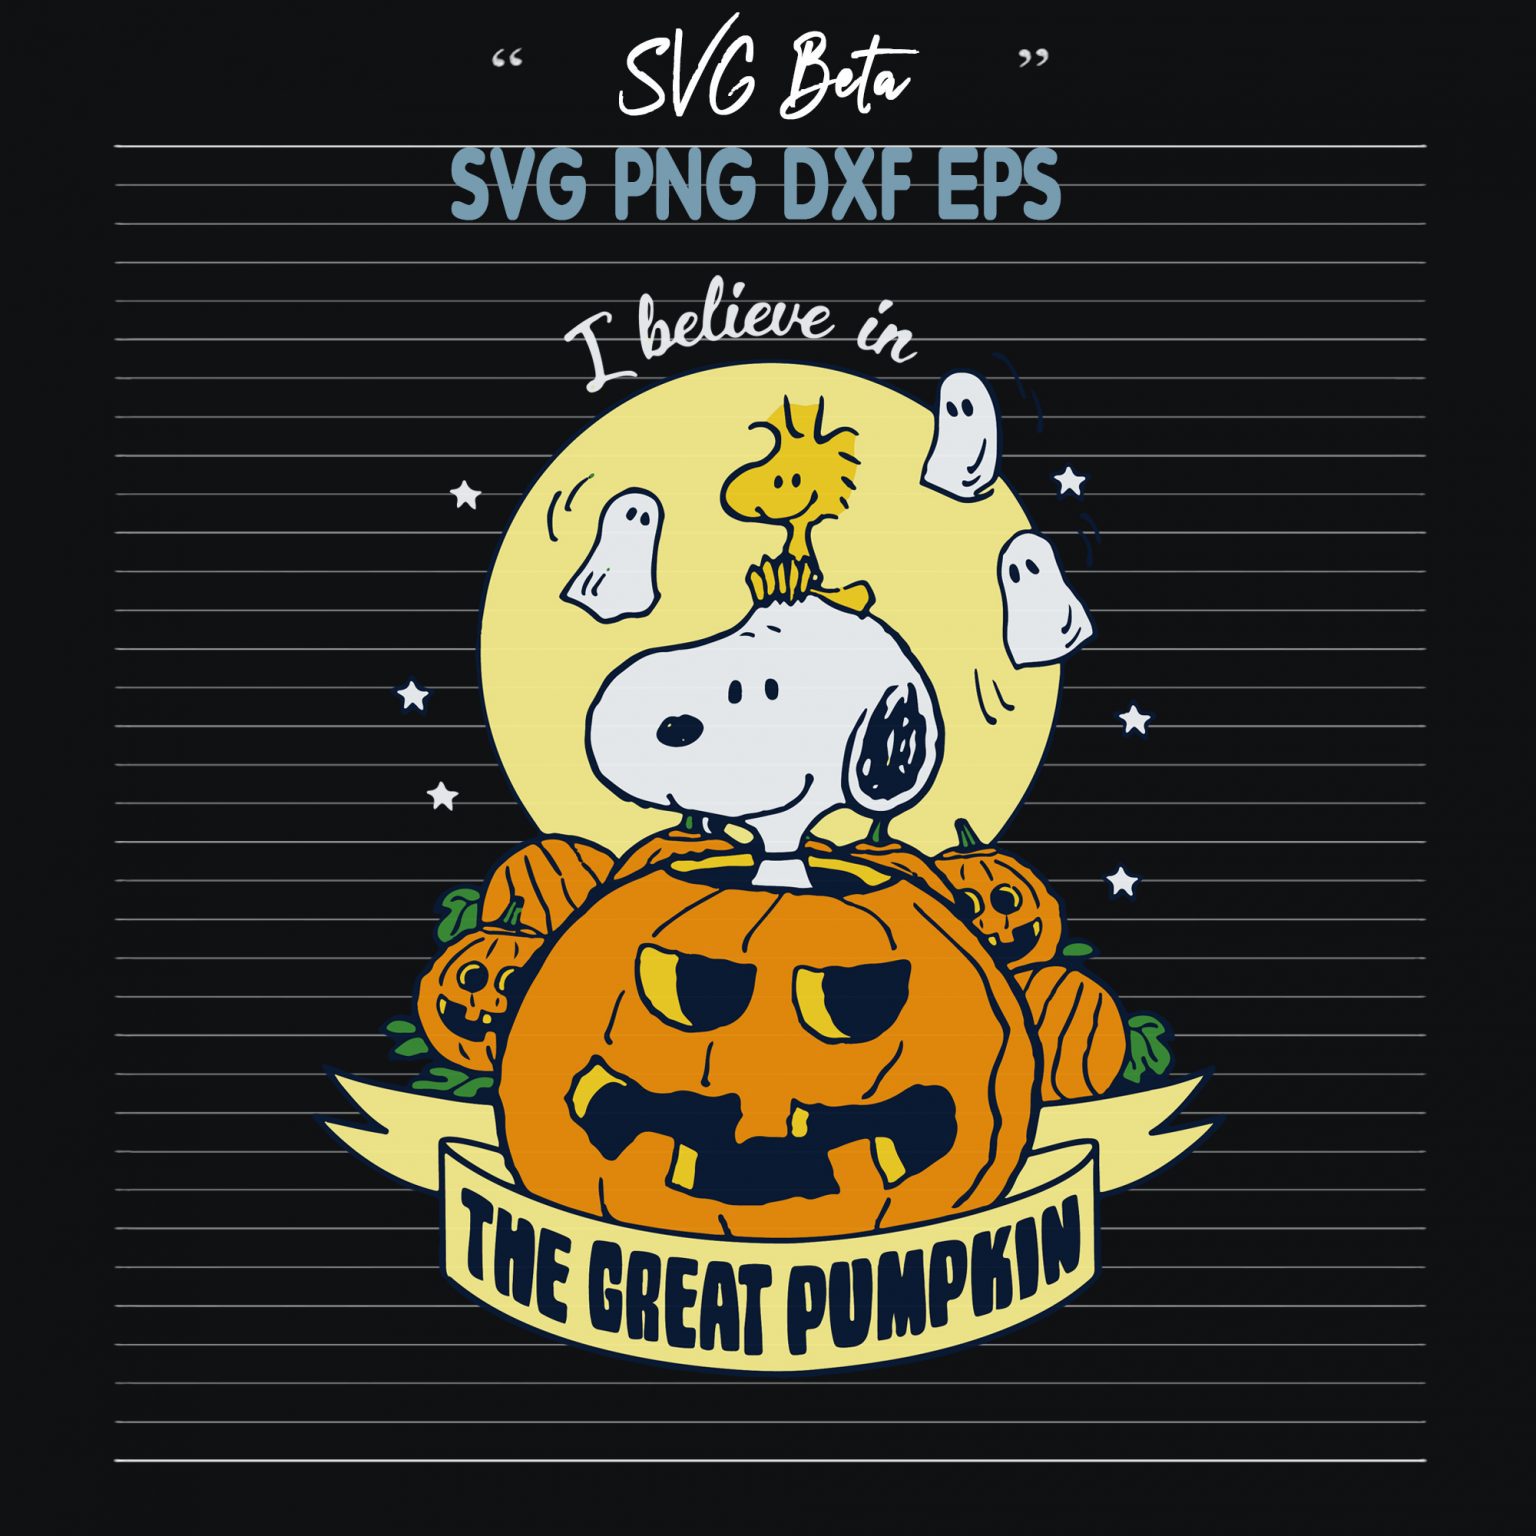 Snoopy halloween the great pumpkin SVG cut file for cricut craft products